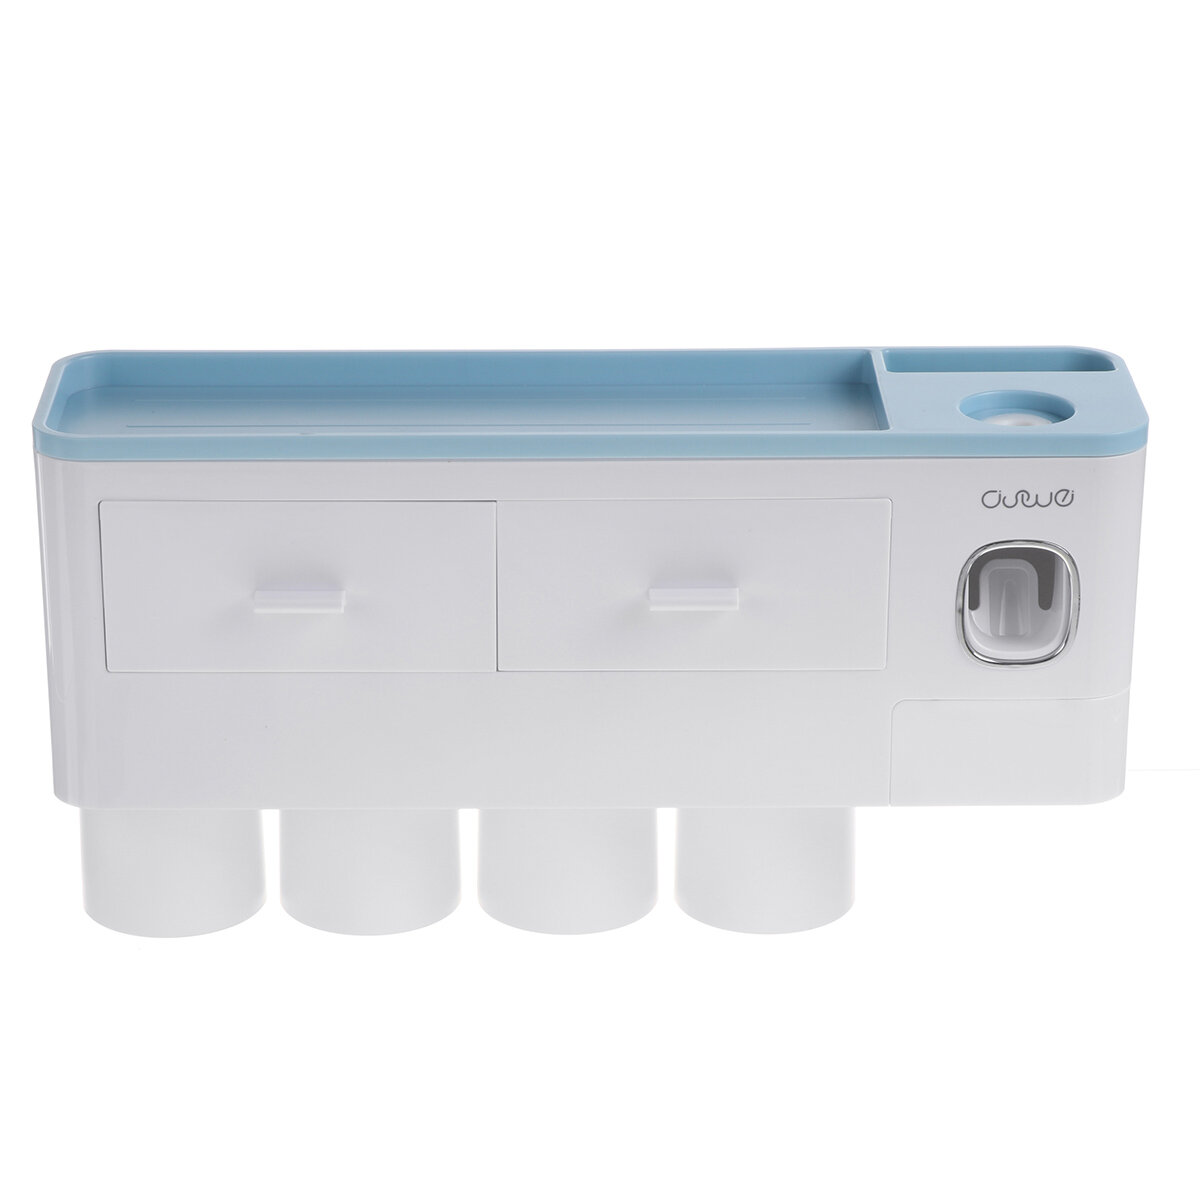 Toothbrush Holder Automatic Toothpaste Dispenser With Cup Wall Mount Toiletries Storage Rack Bathroo